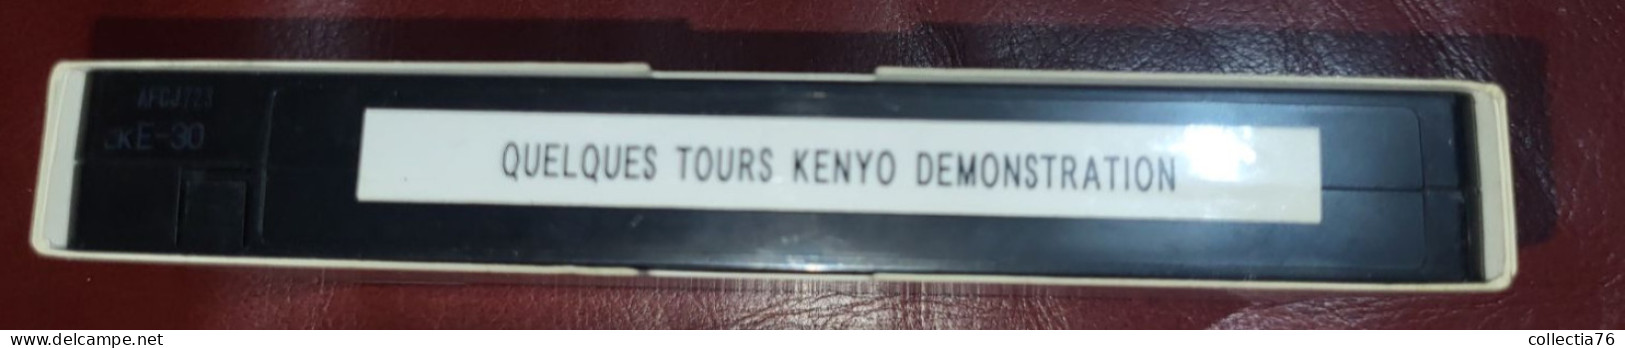 RARE CASSETTE VIDEO VHS MAGIE QUELQUES TOURS KENYO DEMONSTRATION 30 MINUTES ENVIRON - Documentary